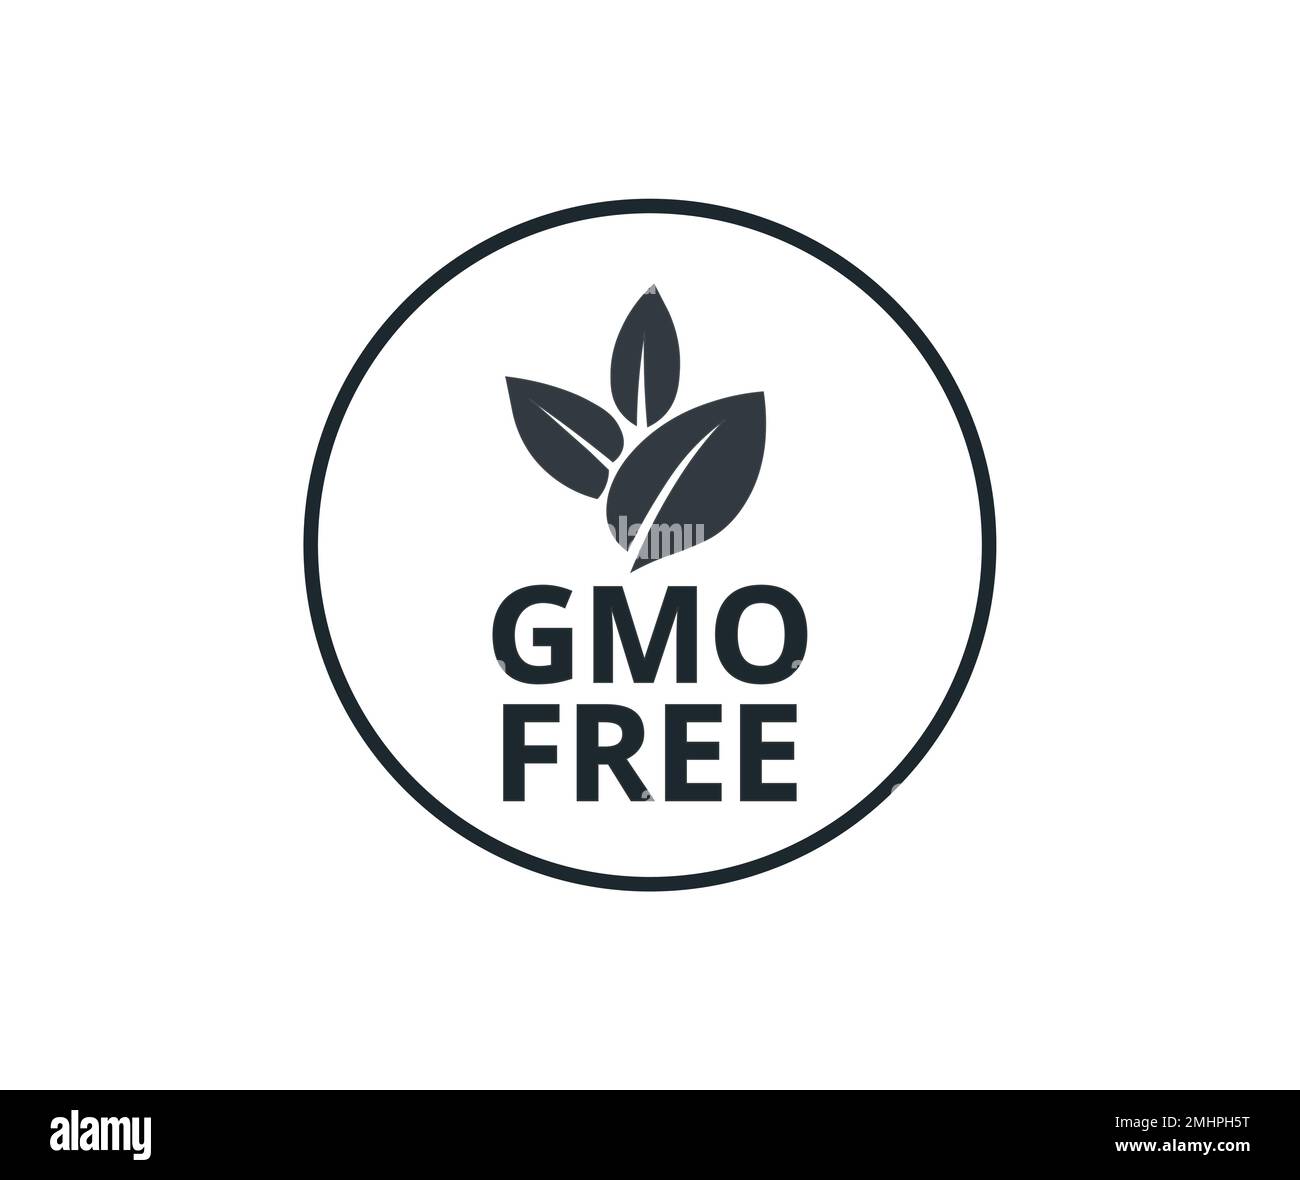 Isolated GMO Free symbol in black color. Concept of packaging and regulations. Stock Vector